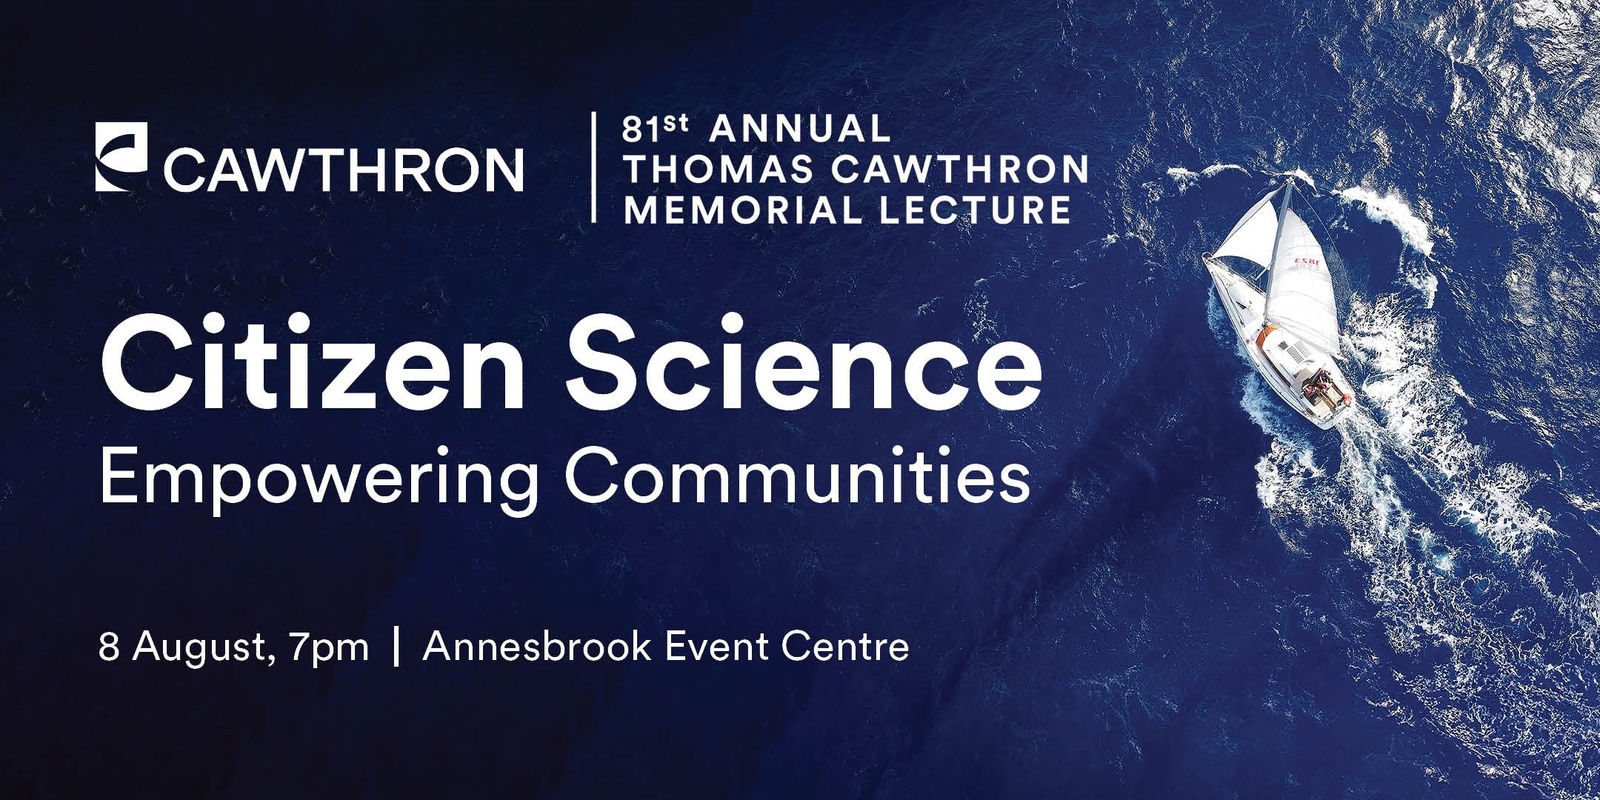 Banner image for 81st Annual Thomas Cawthron Memorial Lecture 